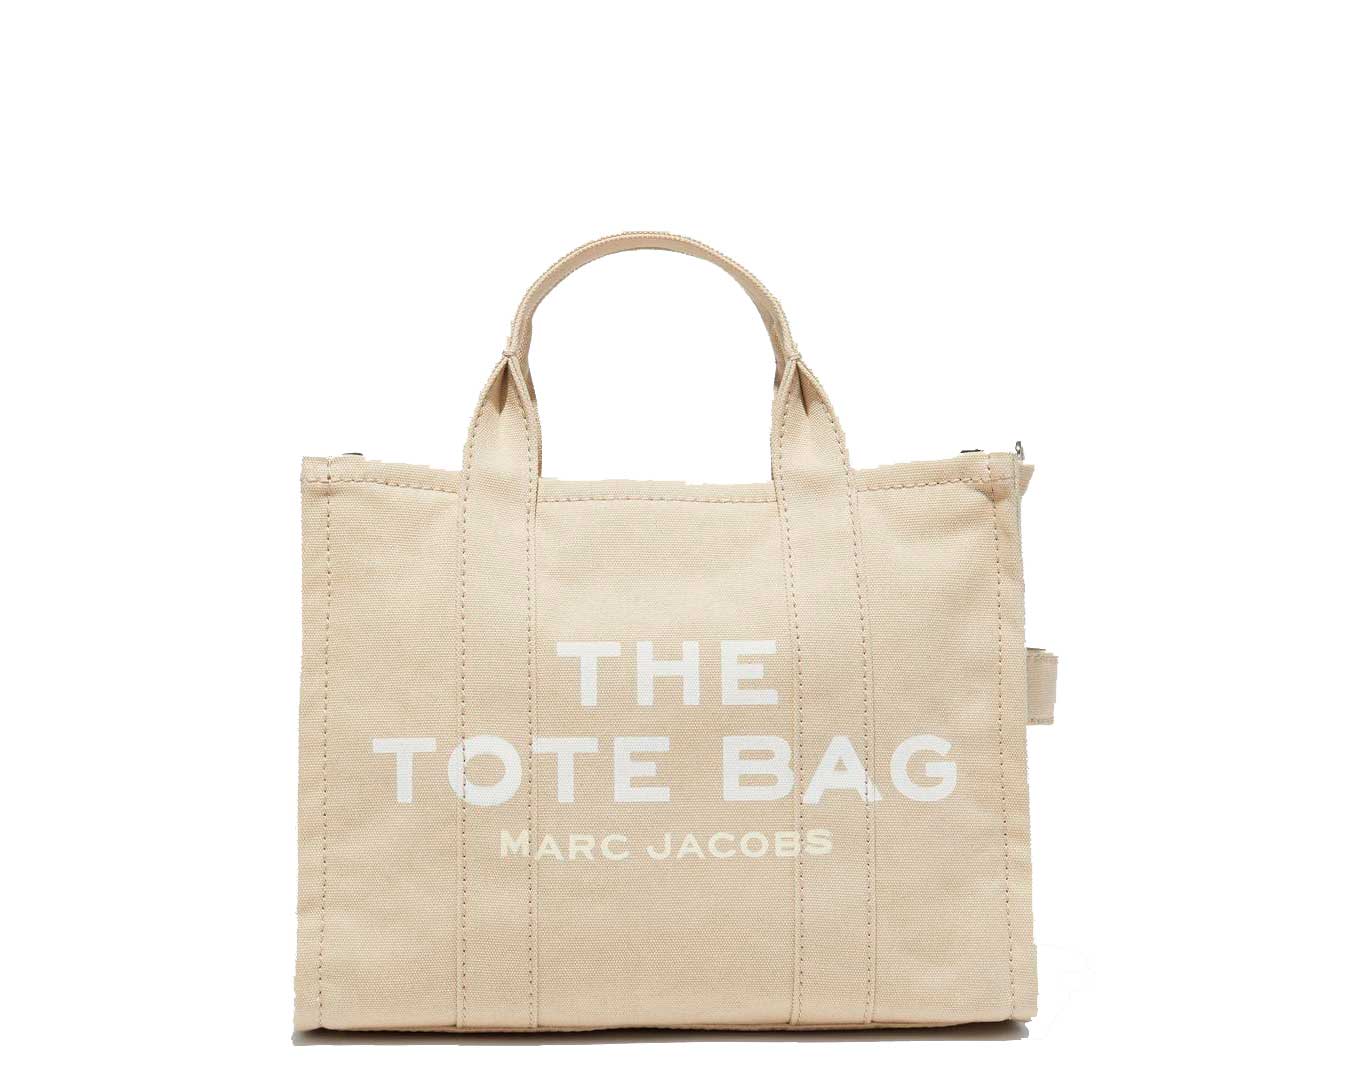 Bolso Marc Jacobs the tote bag mediano